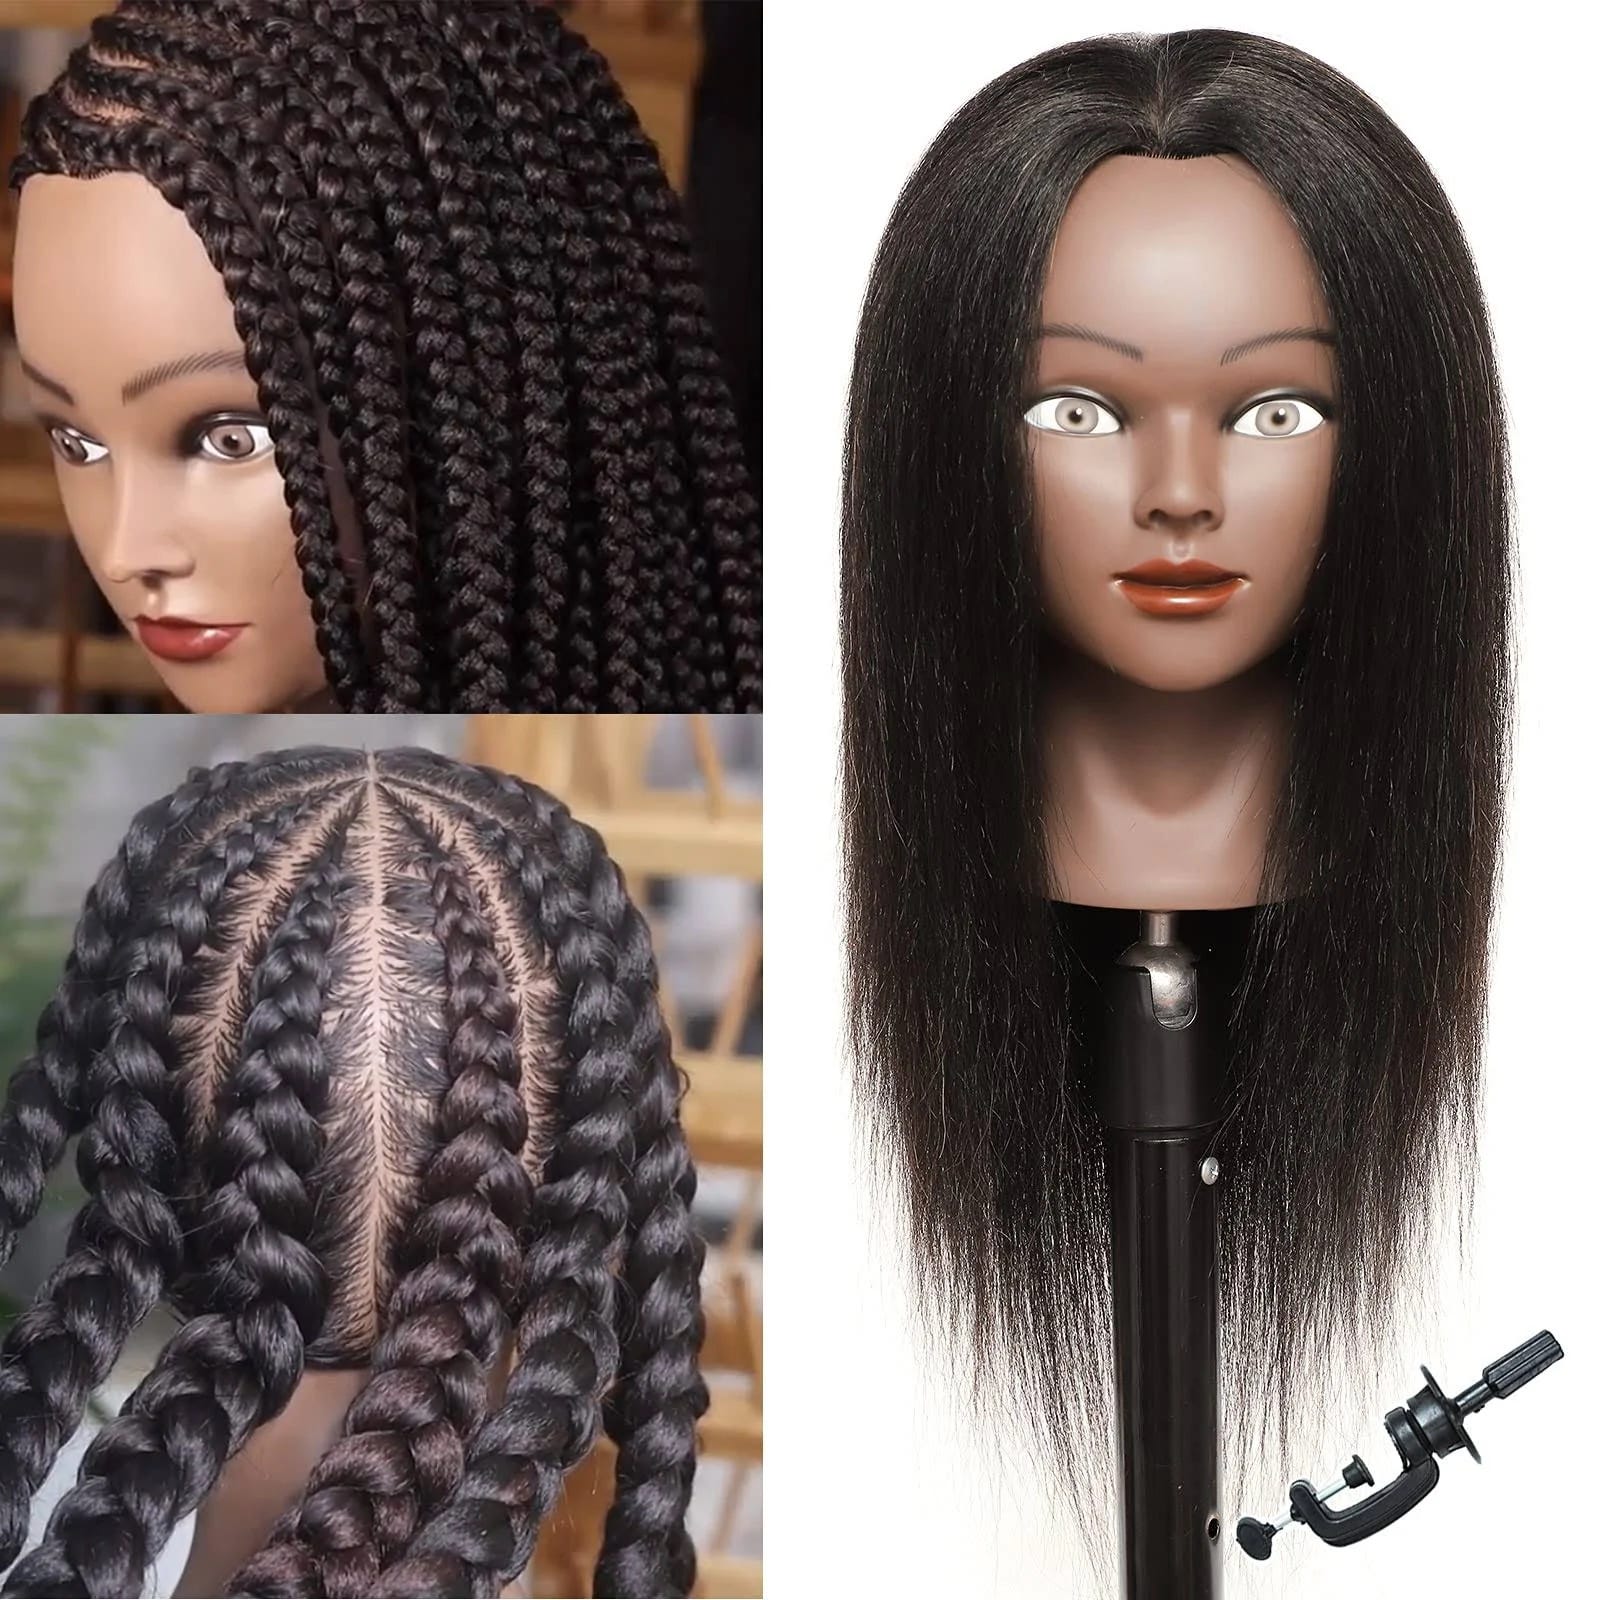 Realistic Mannequin Head for Hair Styling and DIY Hair Extensions | Image